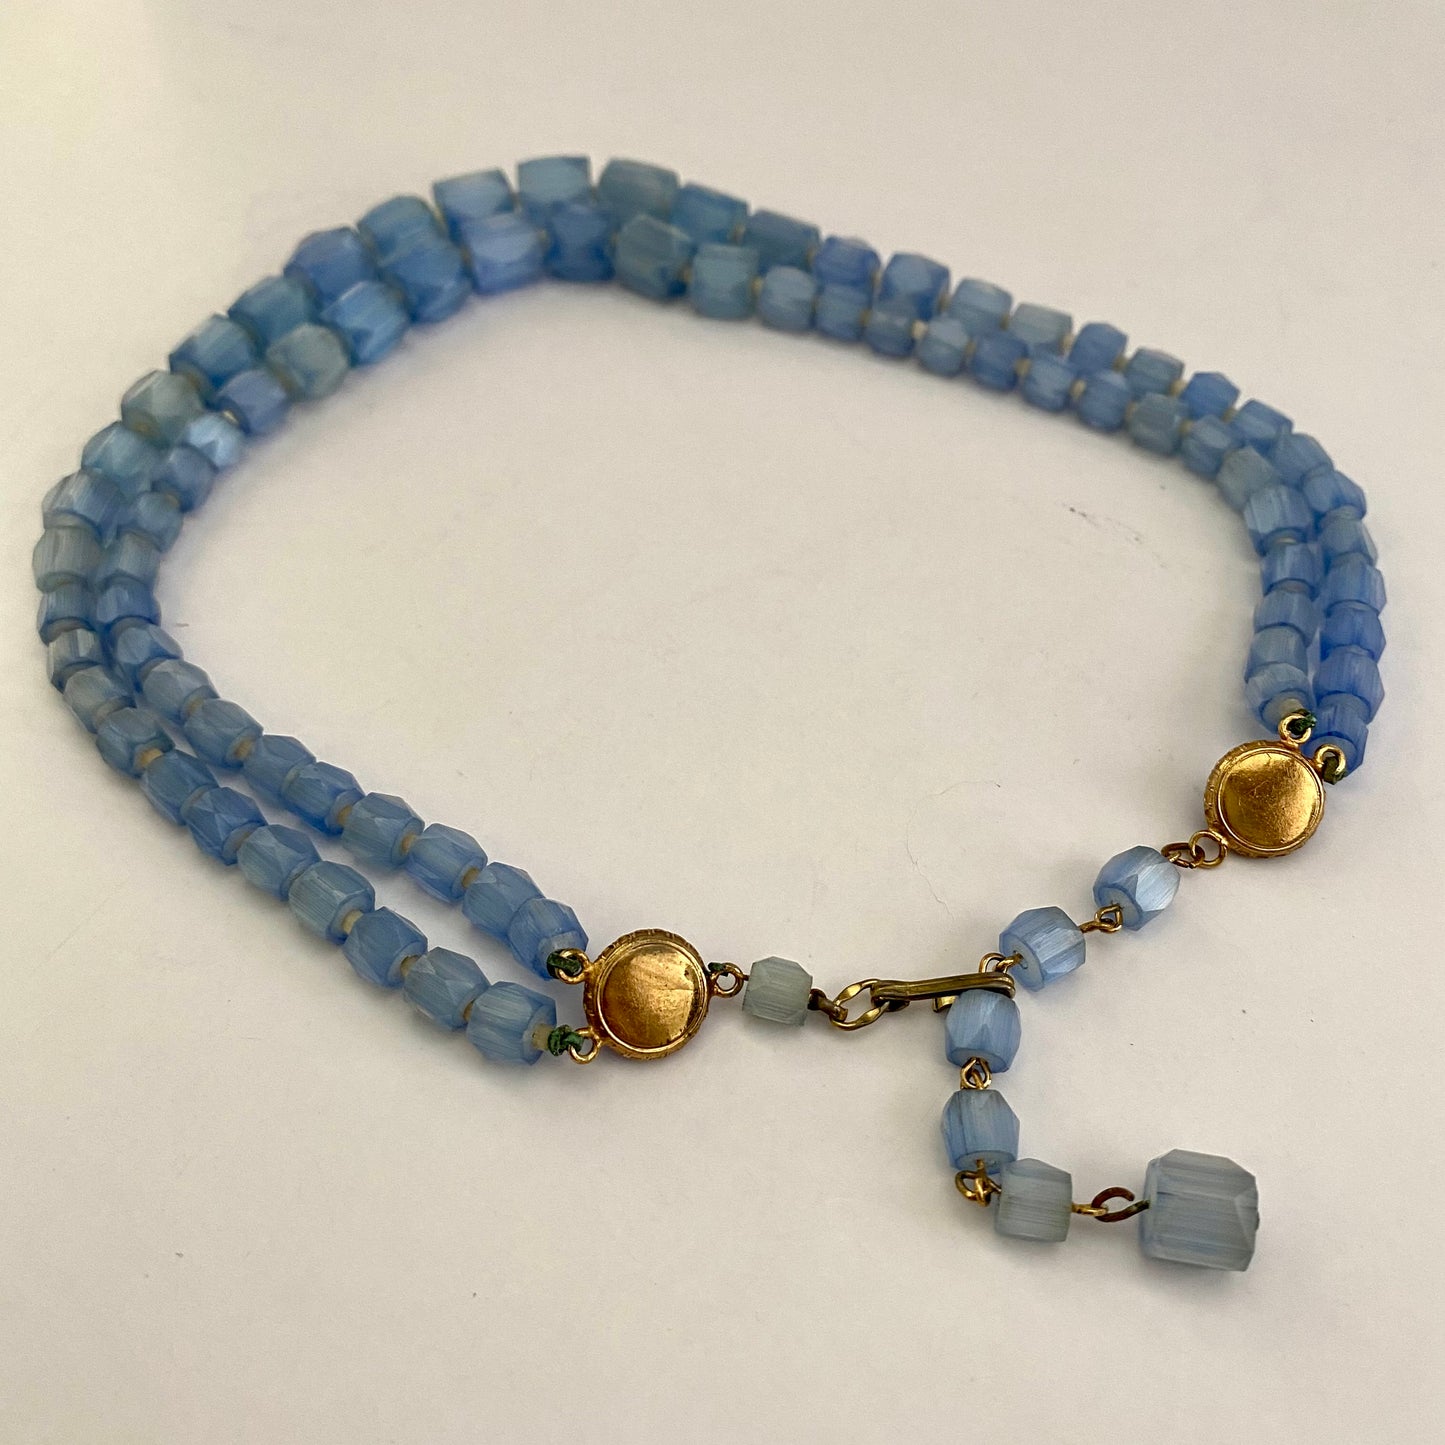 1960s Ice Blue Faceted Glass Bead Necklace